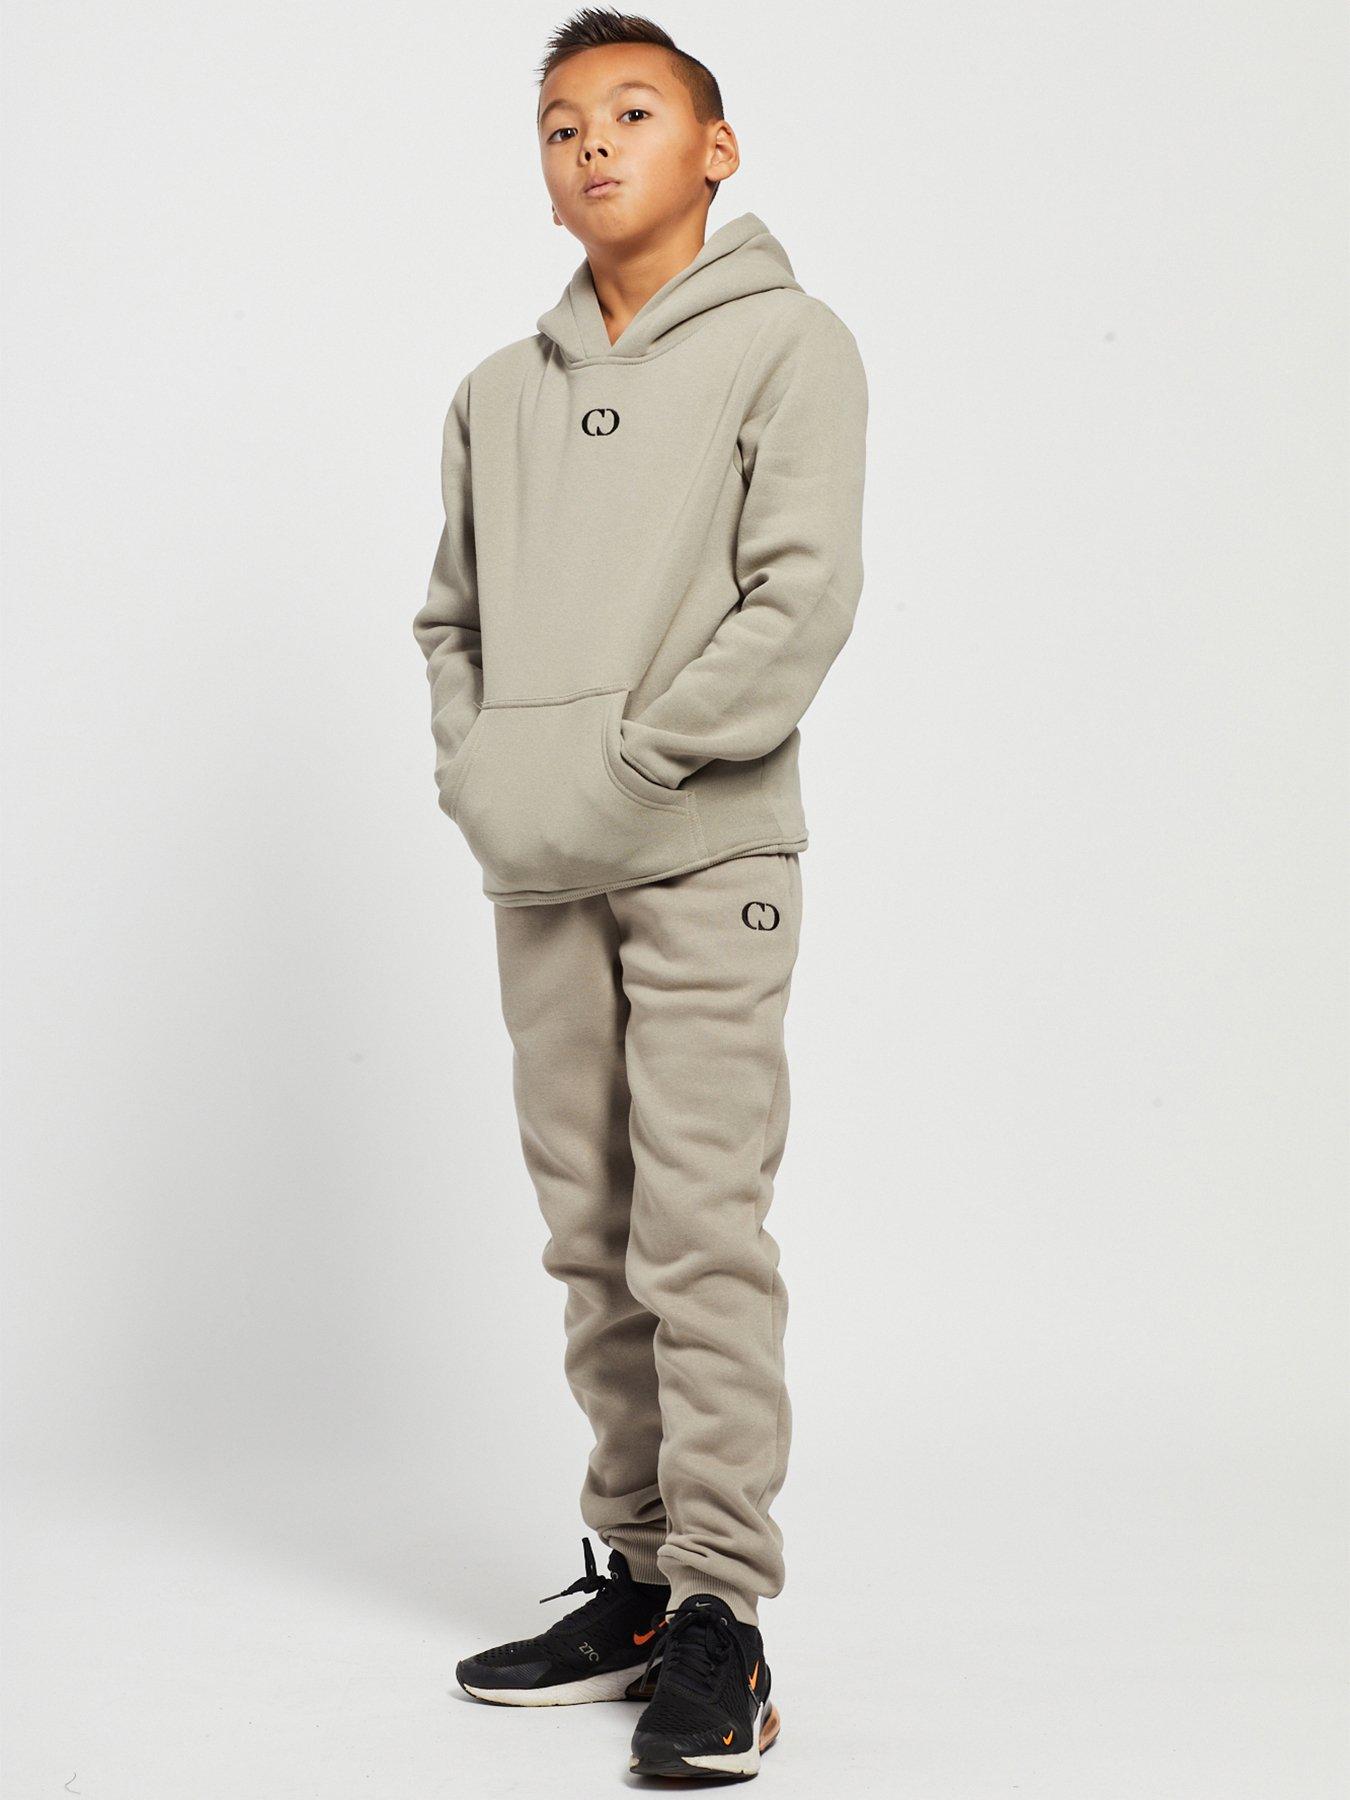 Boys Clothes Boys Eco Pullover Hoodie - Sand